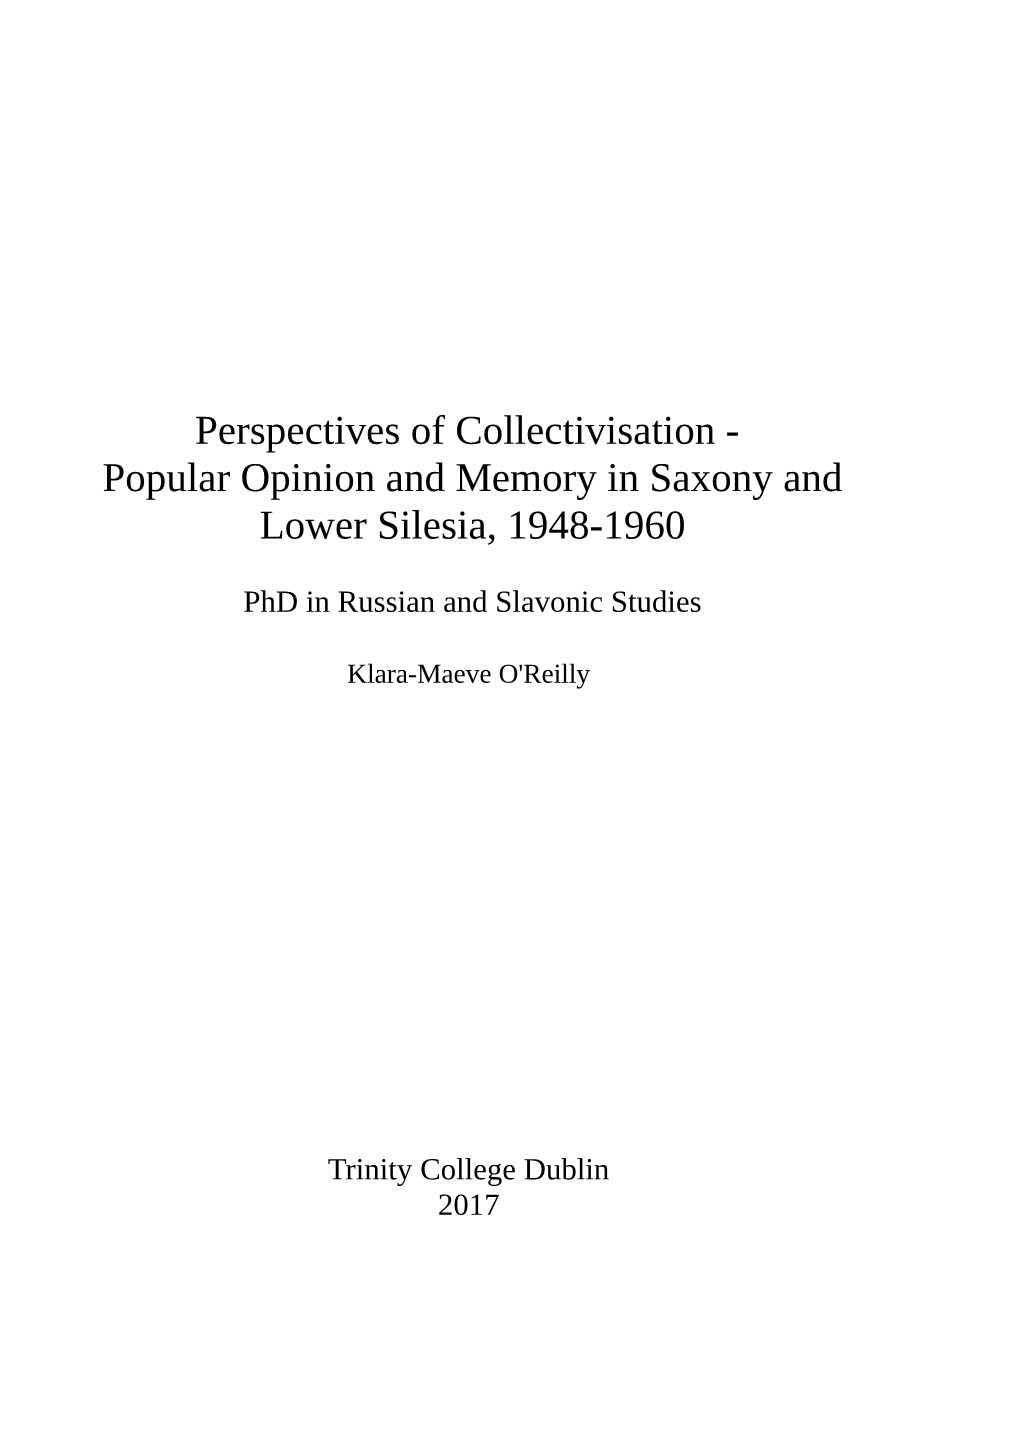 Perspectives of Collectivisation - Popular Opinion and Memory in Saxony and Lower Silesia, 1948-1960